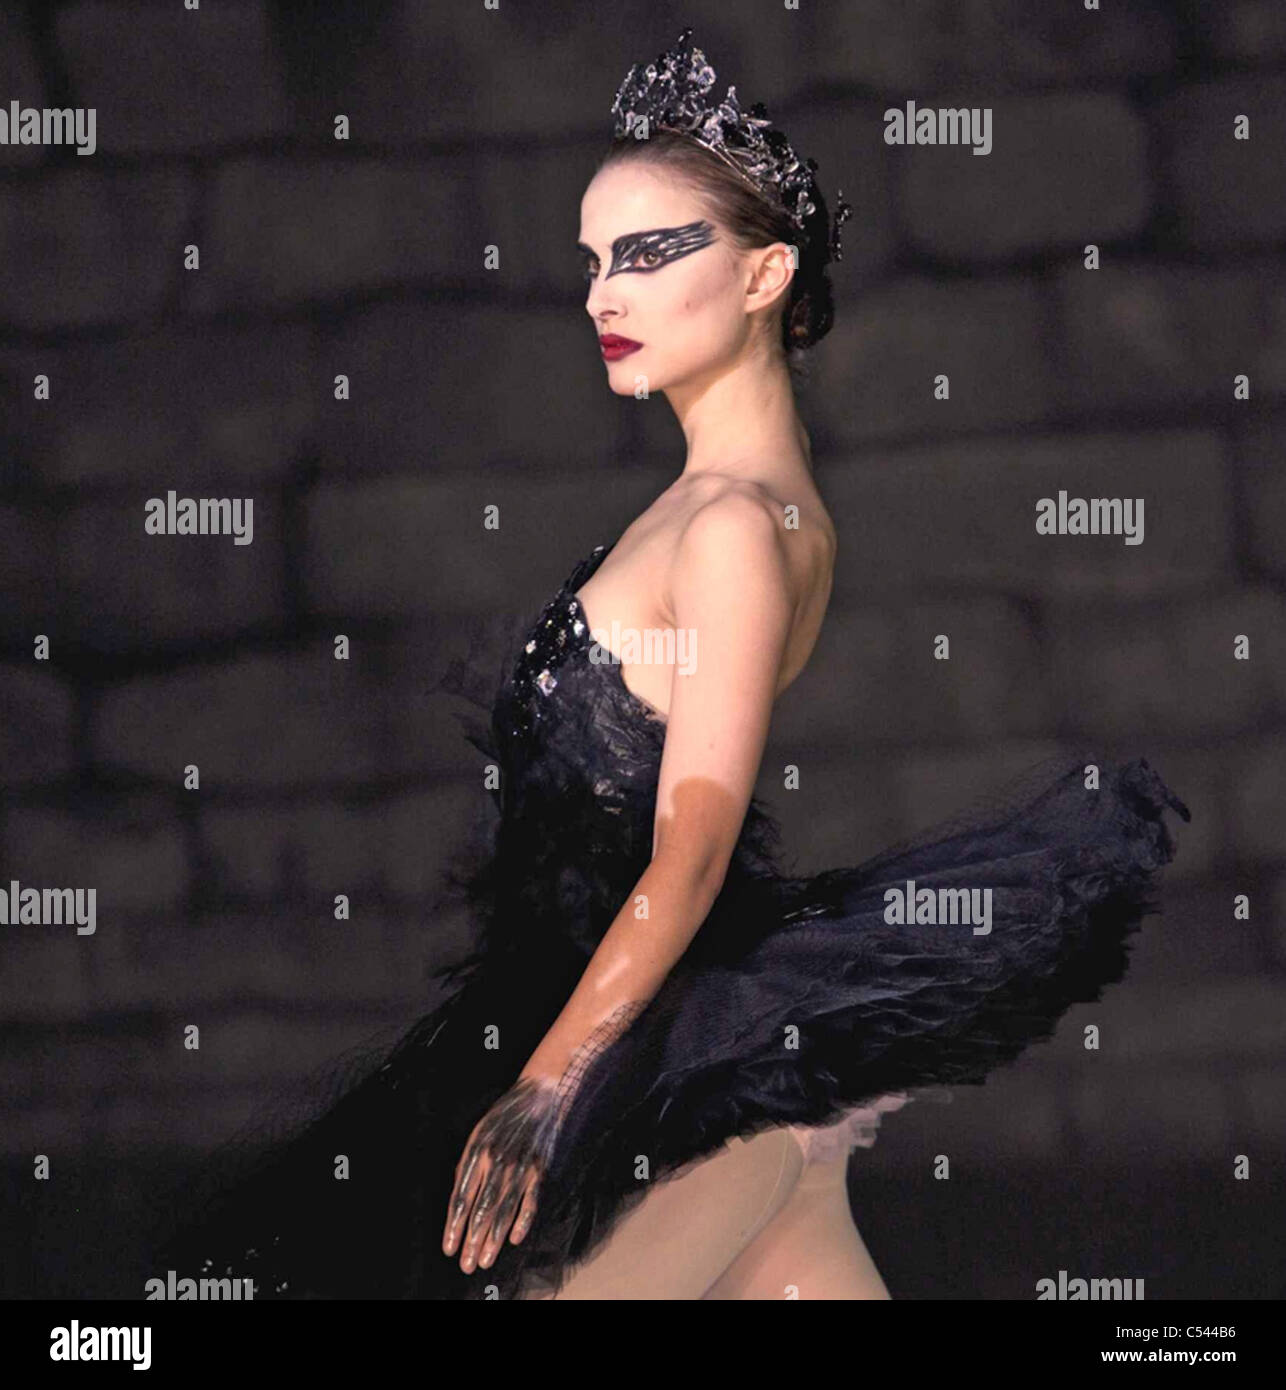 Black Swan Film High Resolution Stock Photography and Images - Alamy